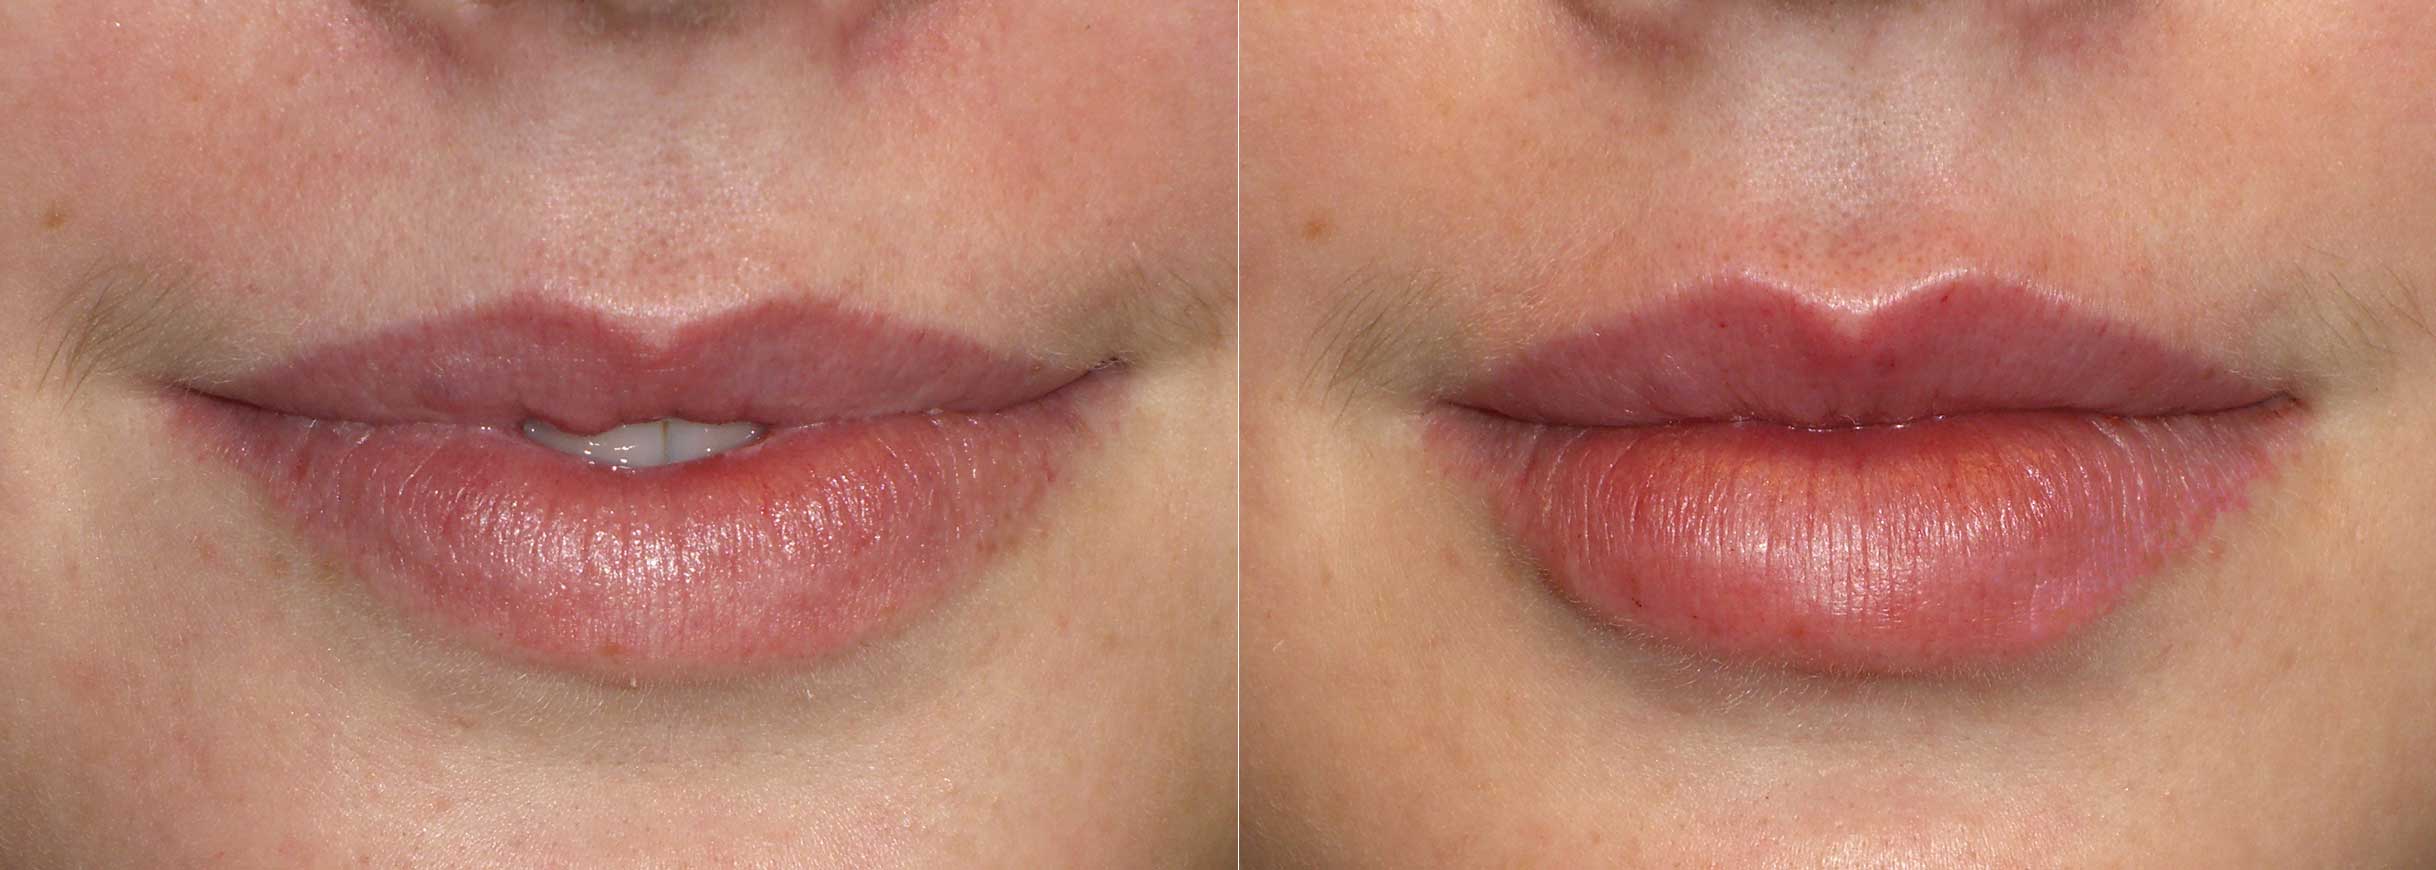 Lip Augmentation Worth It? Reviews, Cost, Pictures - RealSelf